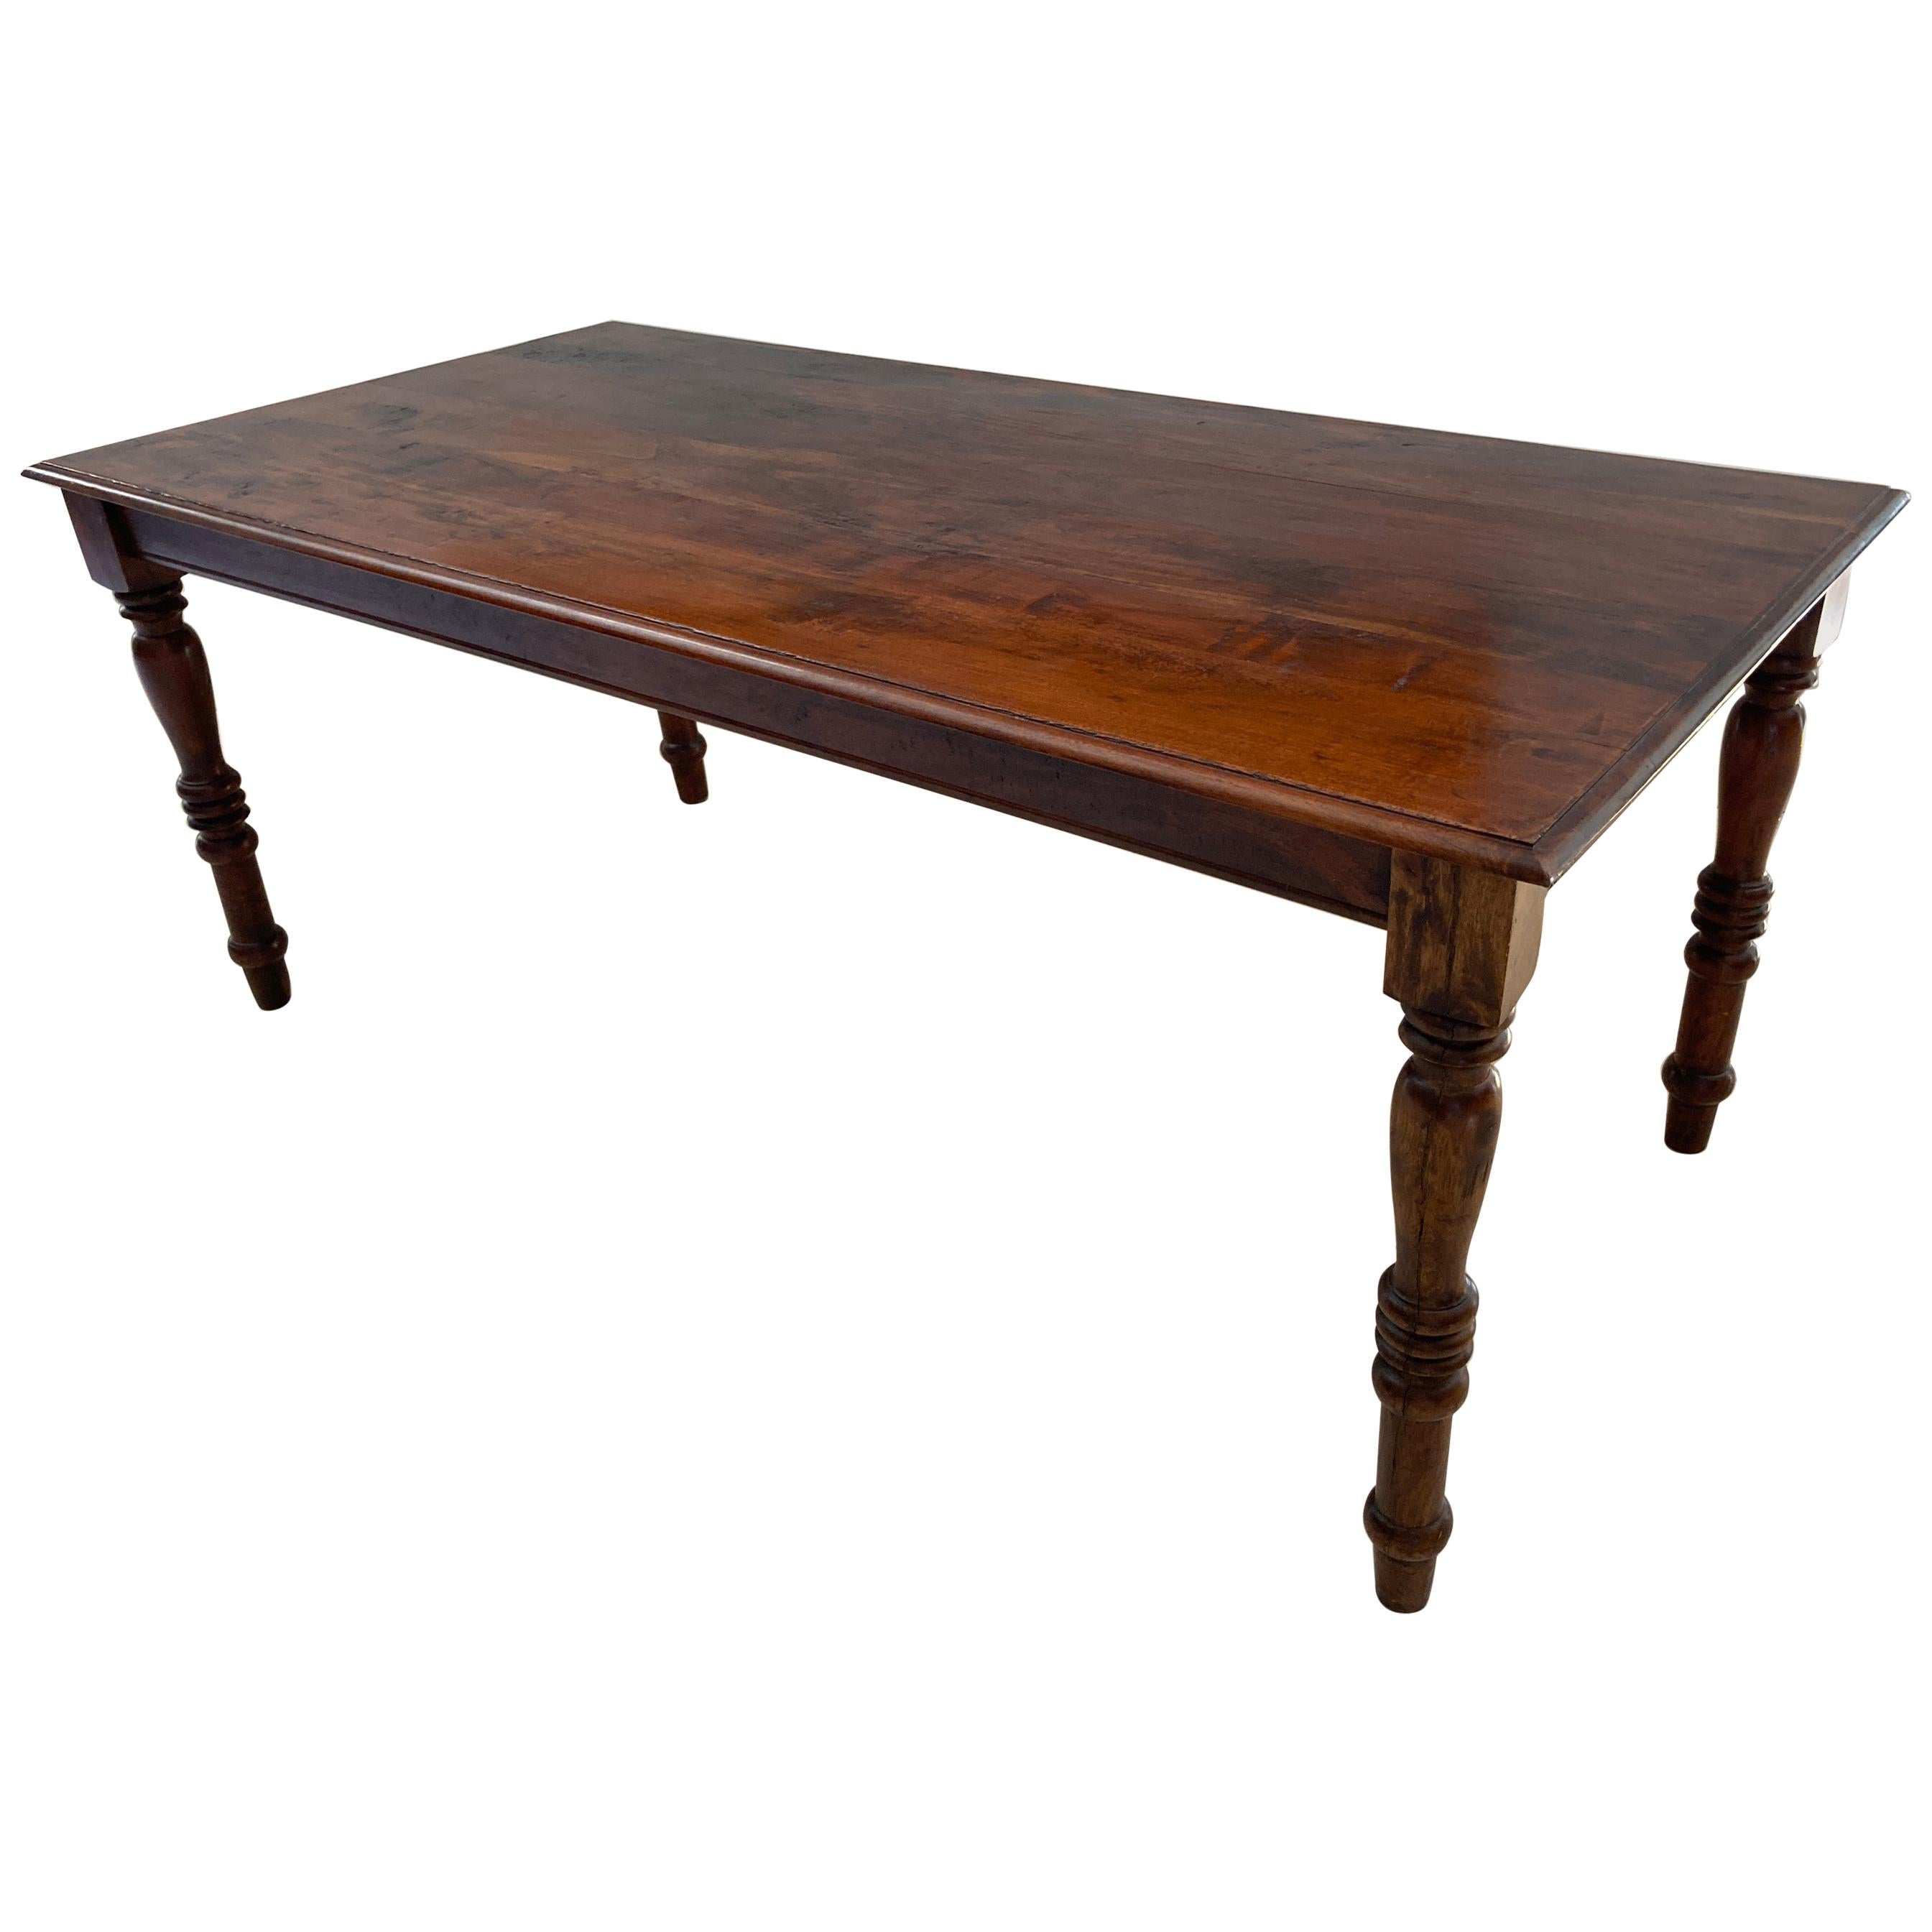 Rectangular French Provincial Style Farmhouse Refectory Dining Table